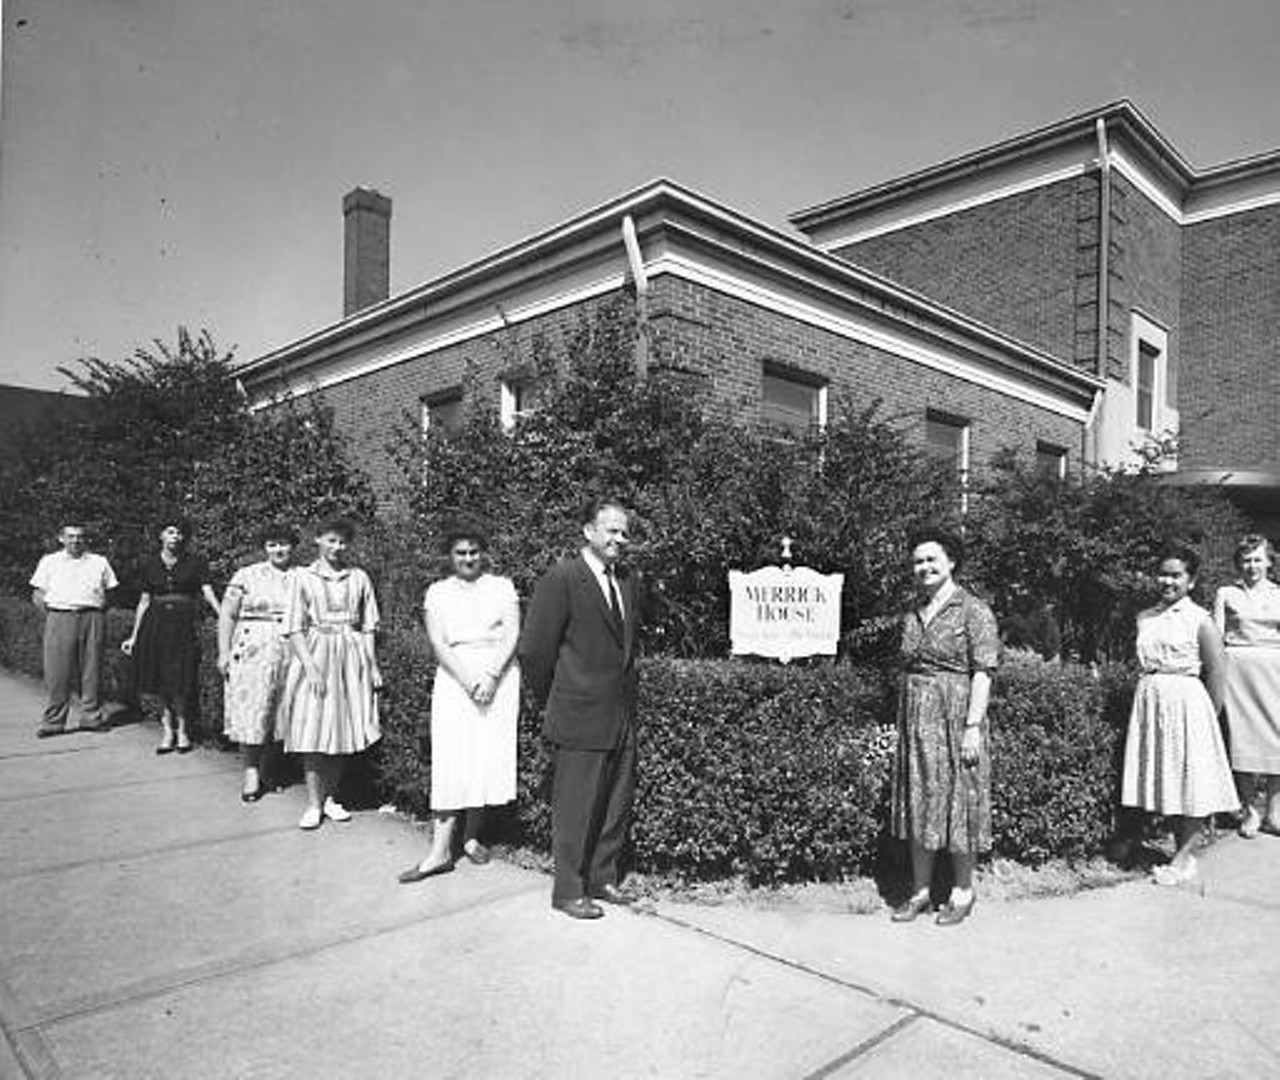 Merrick House along with all of its employees and volunteers, 1960